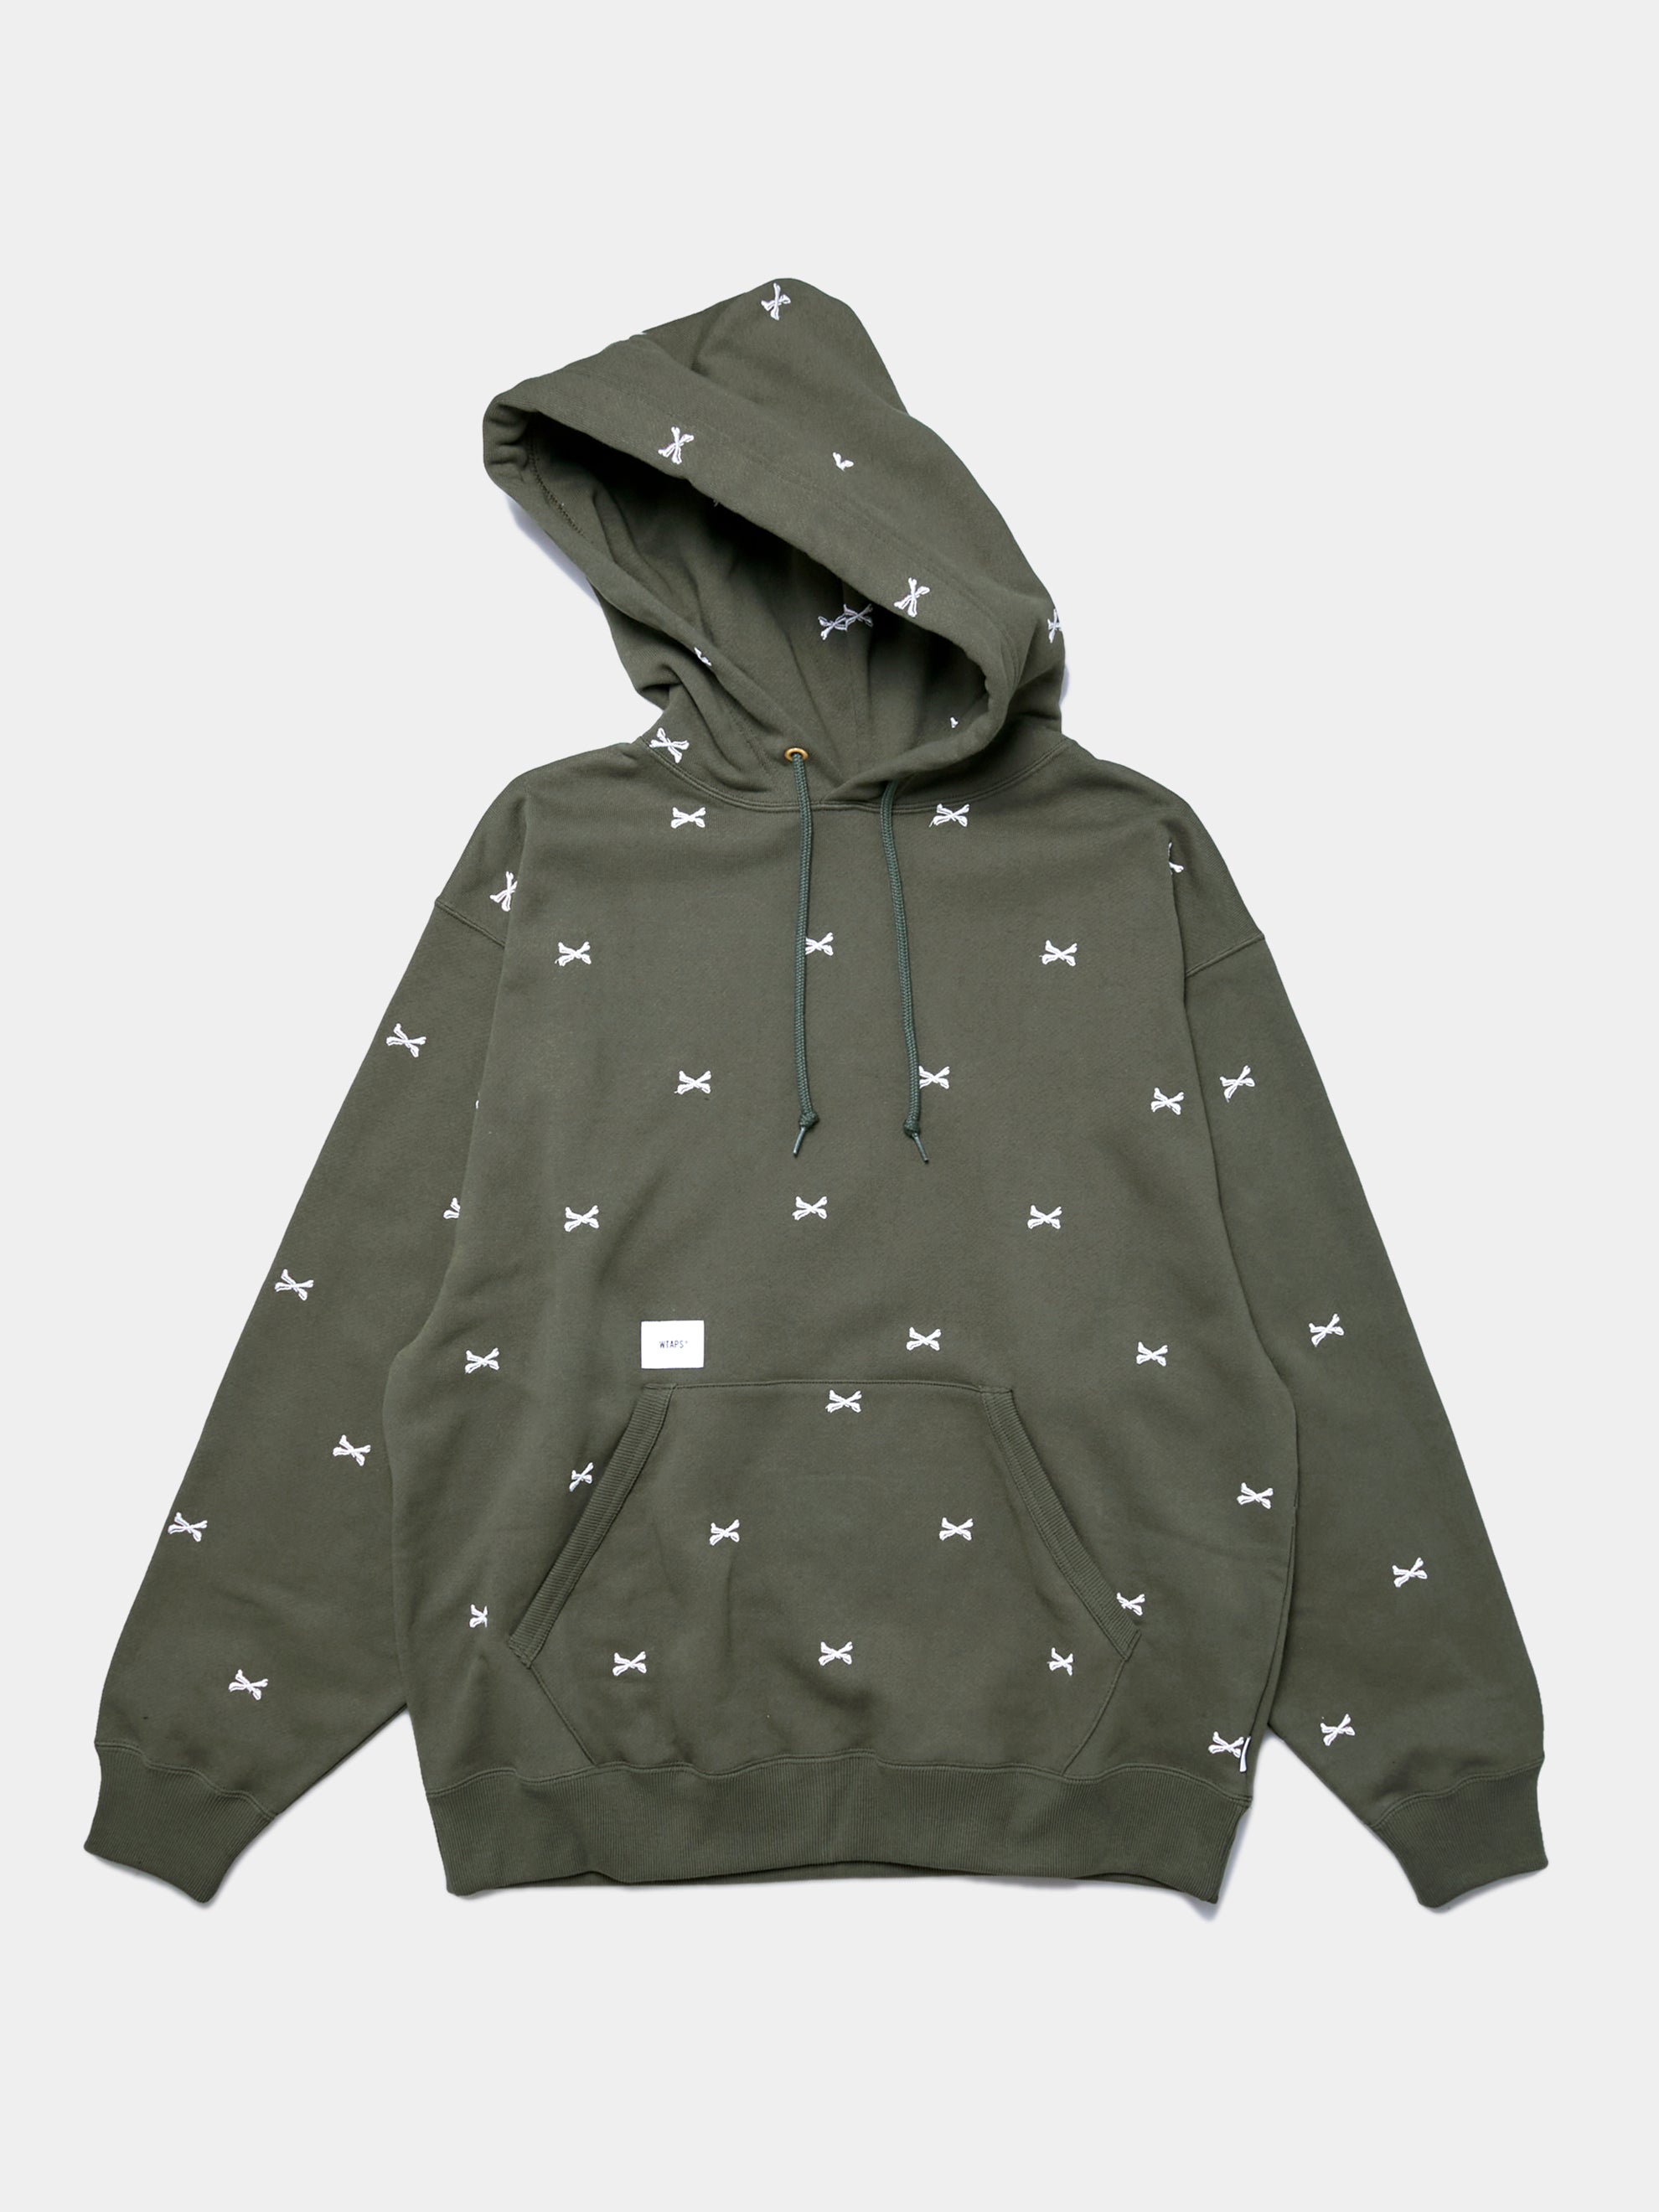 ACNE / HOODY / COTTON (Olive Drab)